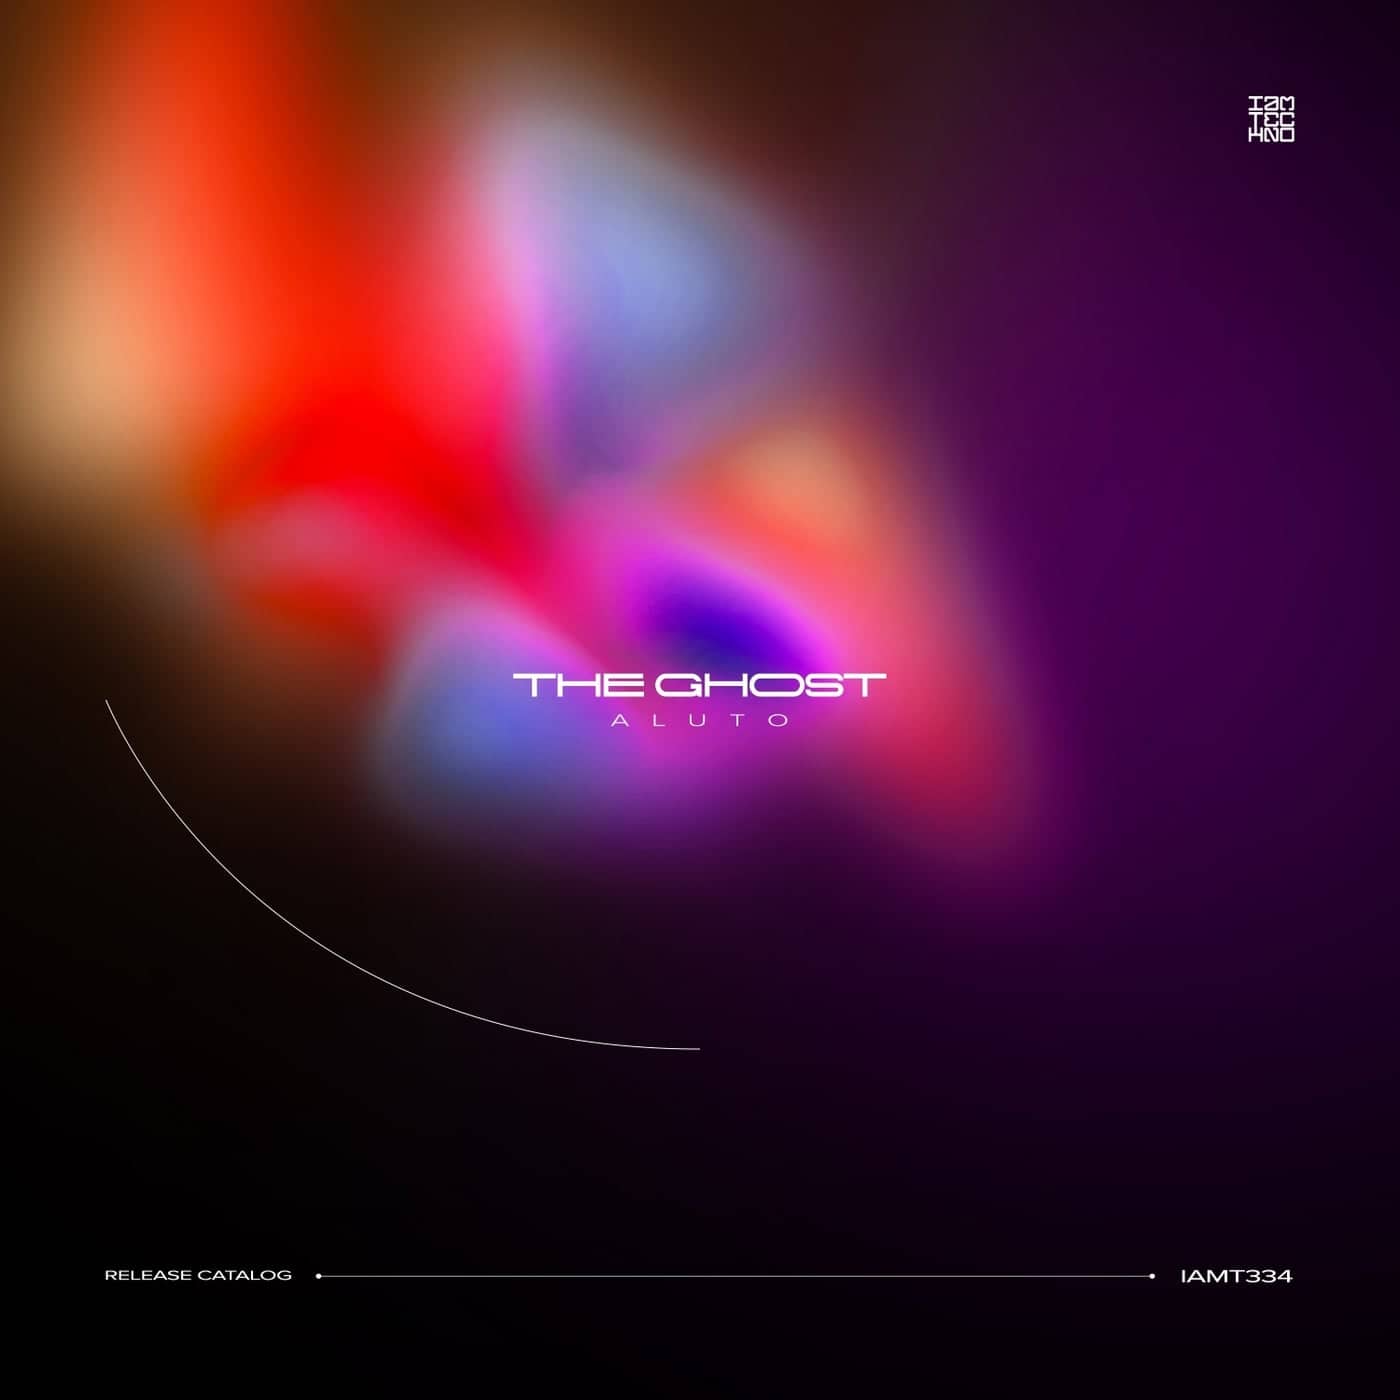 Download ALUTO - The Ghost on Electrobuzz